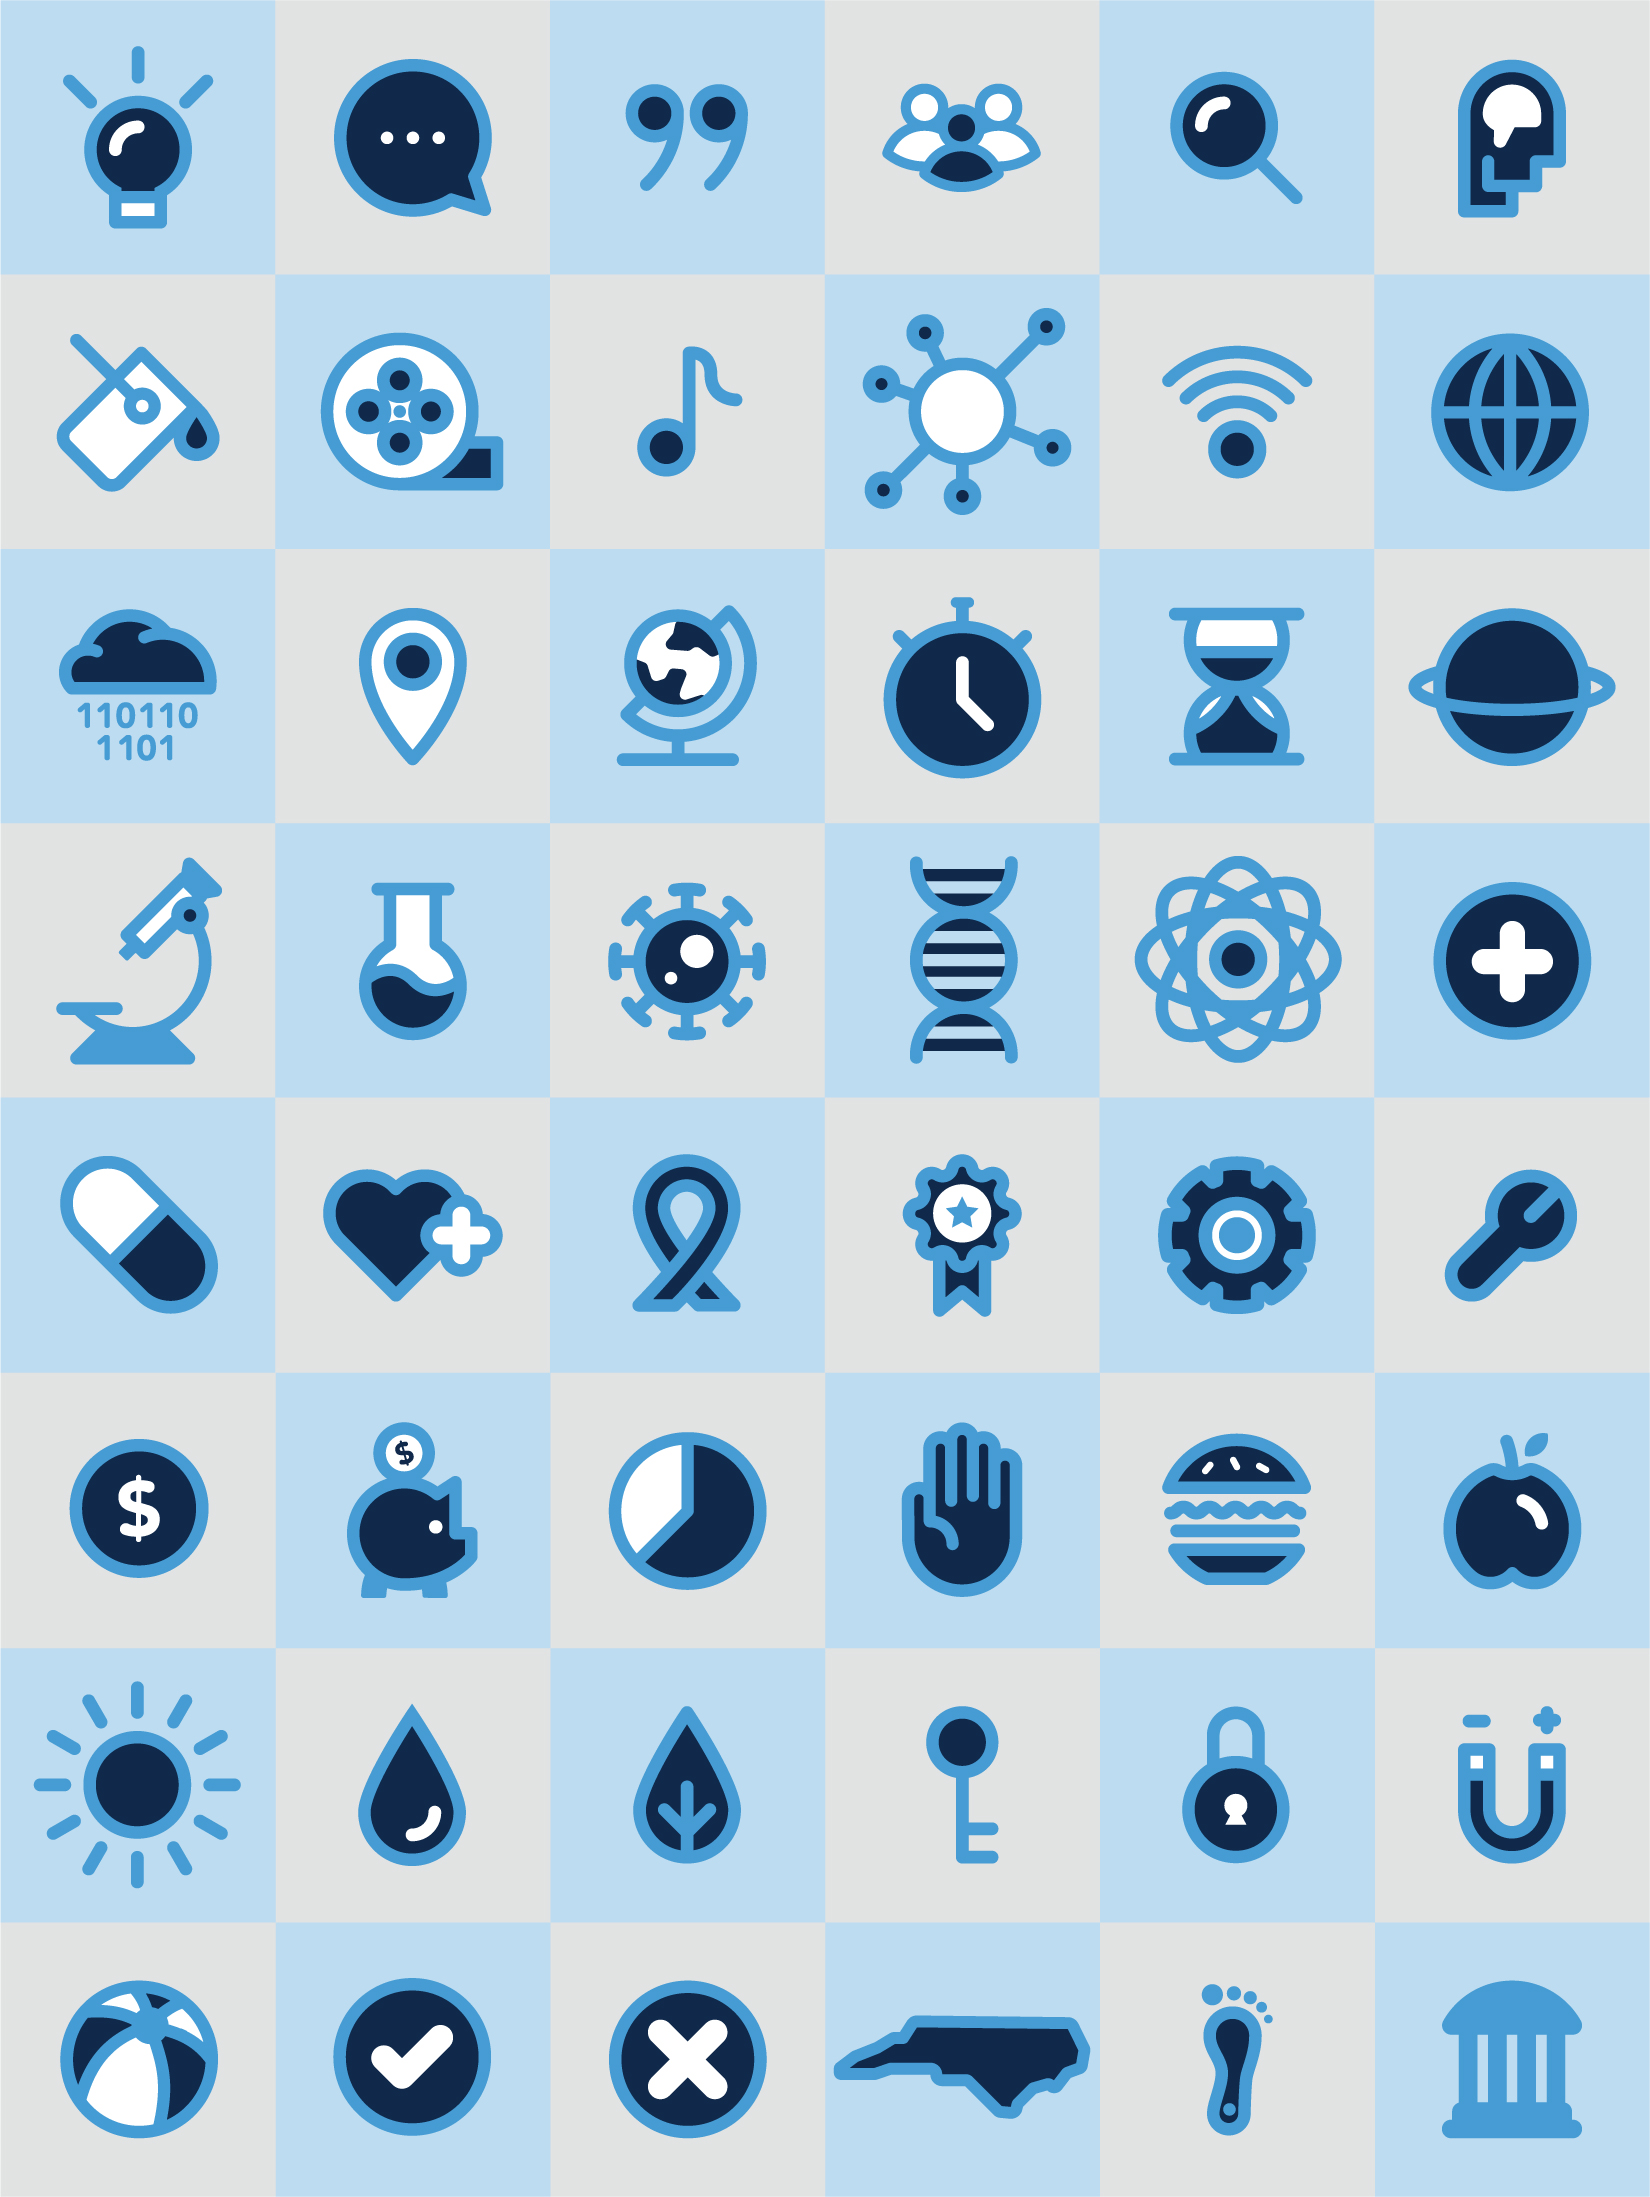 Image showing 48 icons. From top left to bottom right, icons are lightbulb, speech bubble, quotation mark, group of three people, magnifying glass, profile of human head with a brain in it, paint bucket, film roll, music, connection web, wifi icon, world wide web globe, data cloud, location marker, globe, stopwatch, hourglass, planet, microscope, chemistry beaker, virus, DNA strand, Nuclear atom, health sign in a circle, pill, heart with a plus next to it, organizational ribbon, reward ribbon, miscellaneous cog, wrench, dollar sign in a circle, piggy bank with a coin going into it, graph, open hand, hamburger, apple, sun, water droplet, leaf, key, lock, magnet, beach ball, check-mark in a circle, x-mark in a circle, outline of North Carolina, Tarheel foot, and the old well.